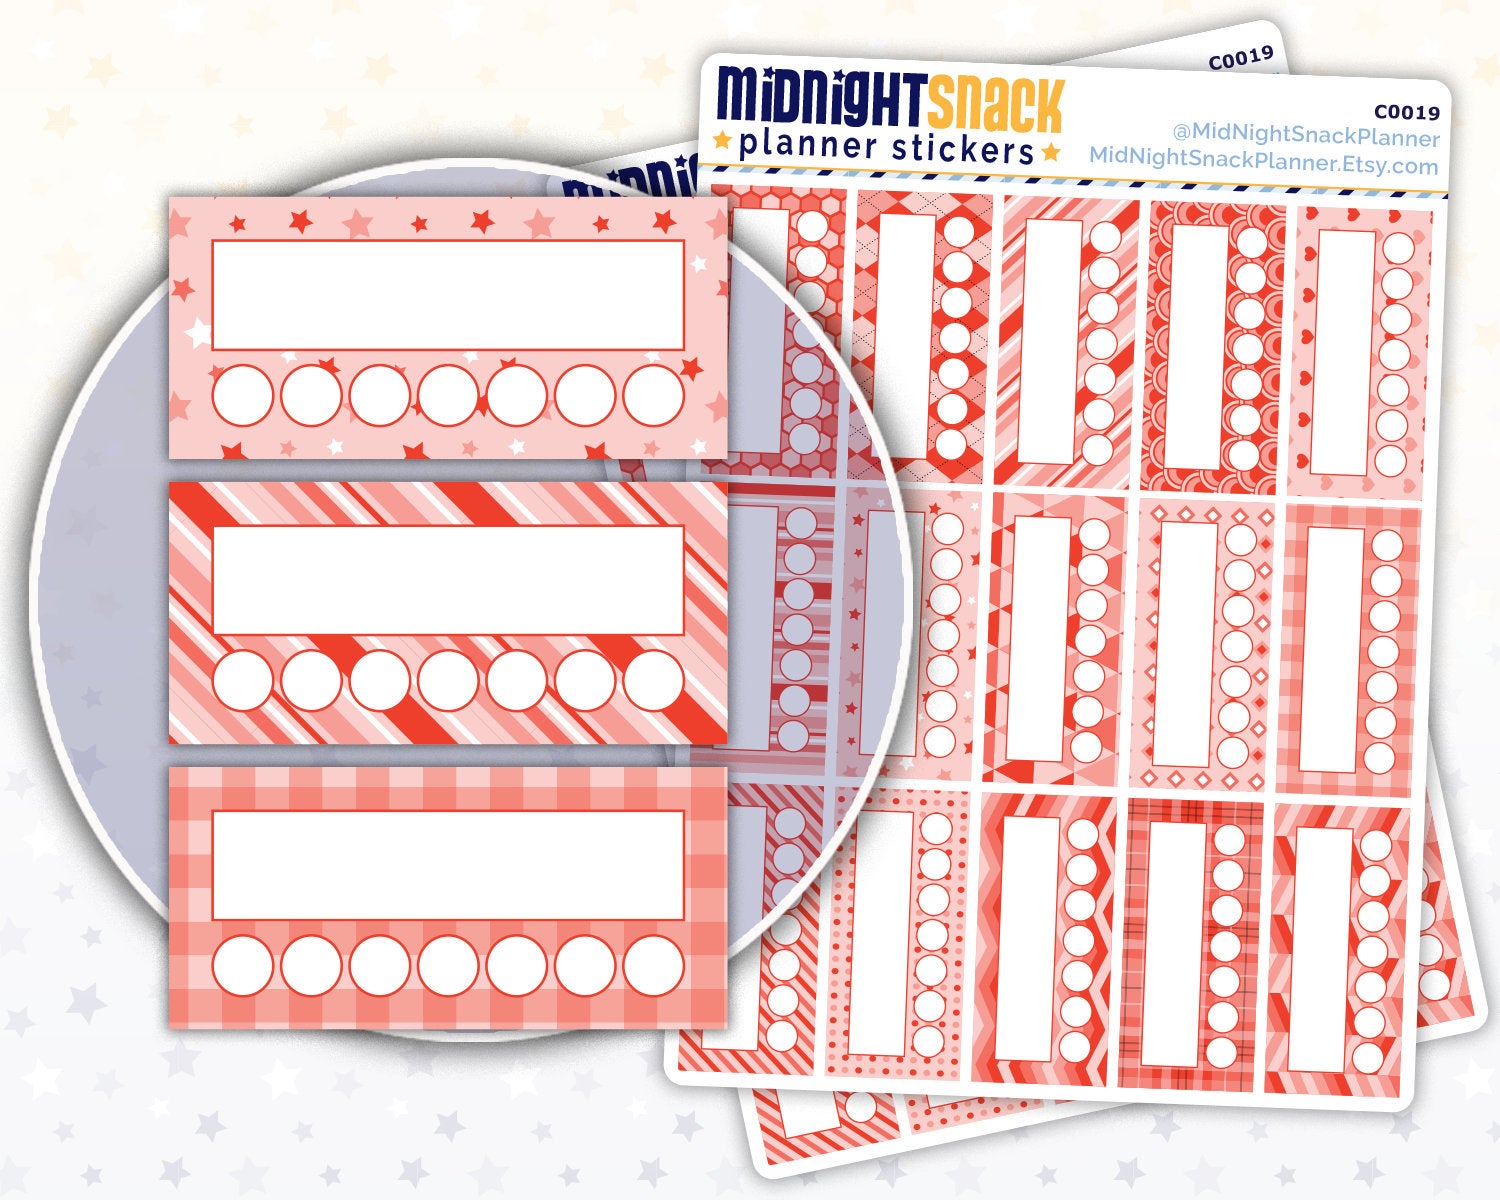 Red Patterned Habit Tracker Planner Stickers Midnight Snack Planner